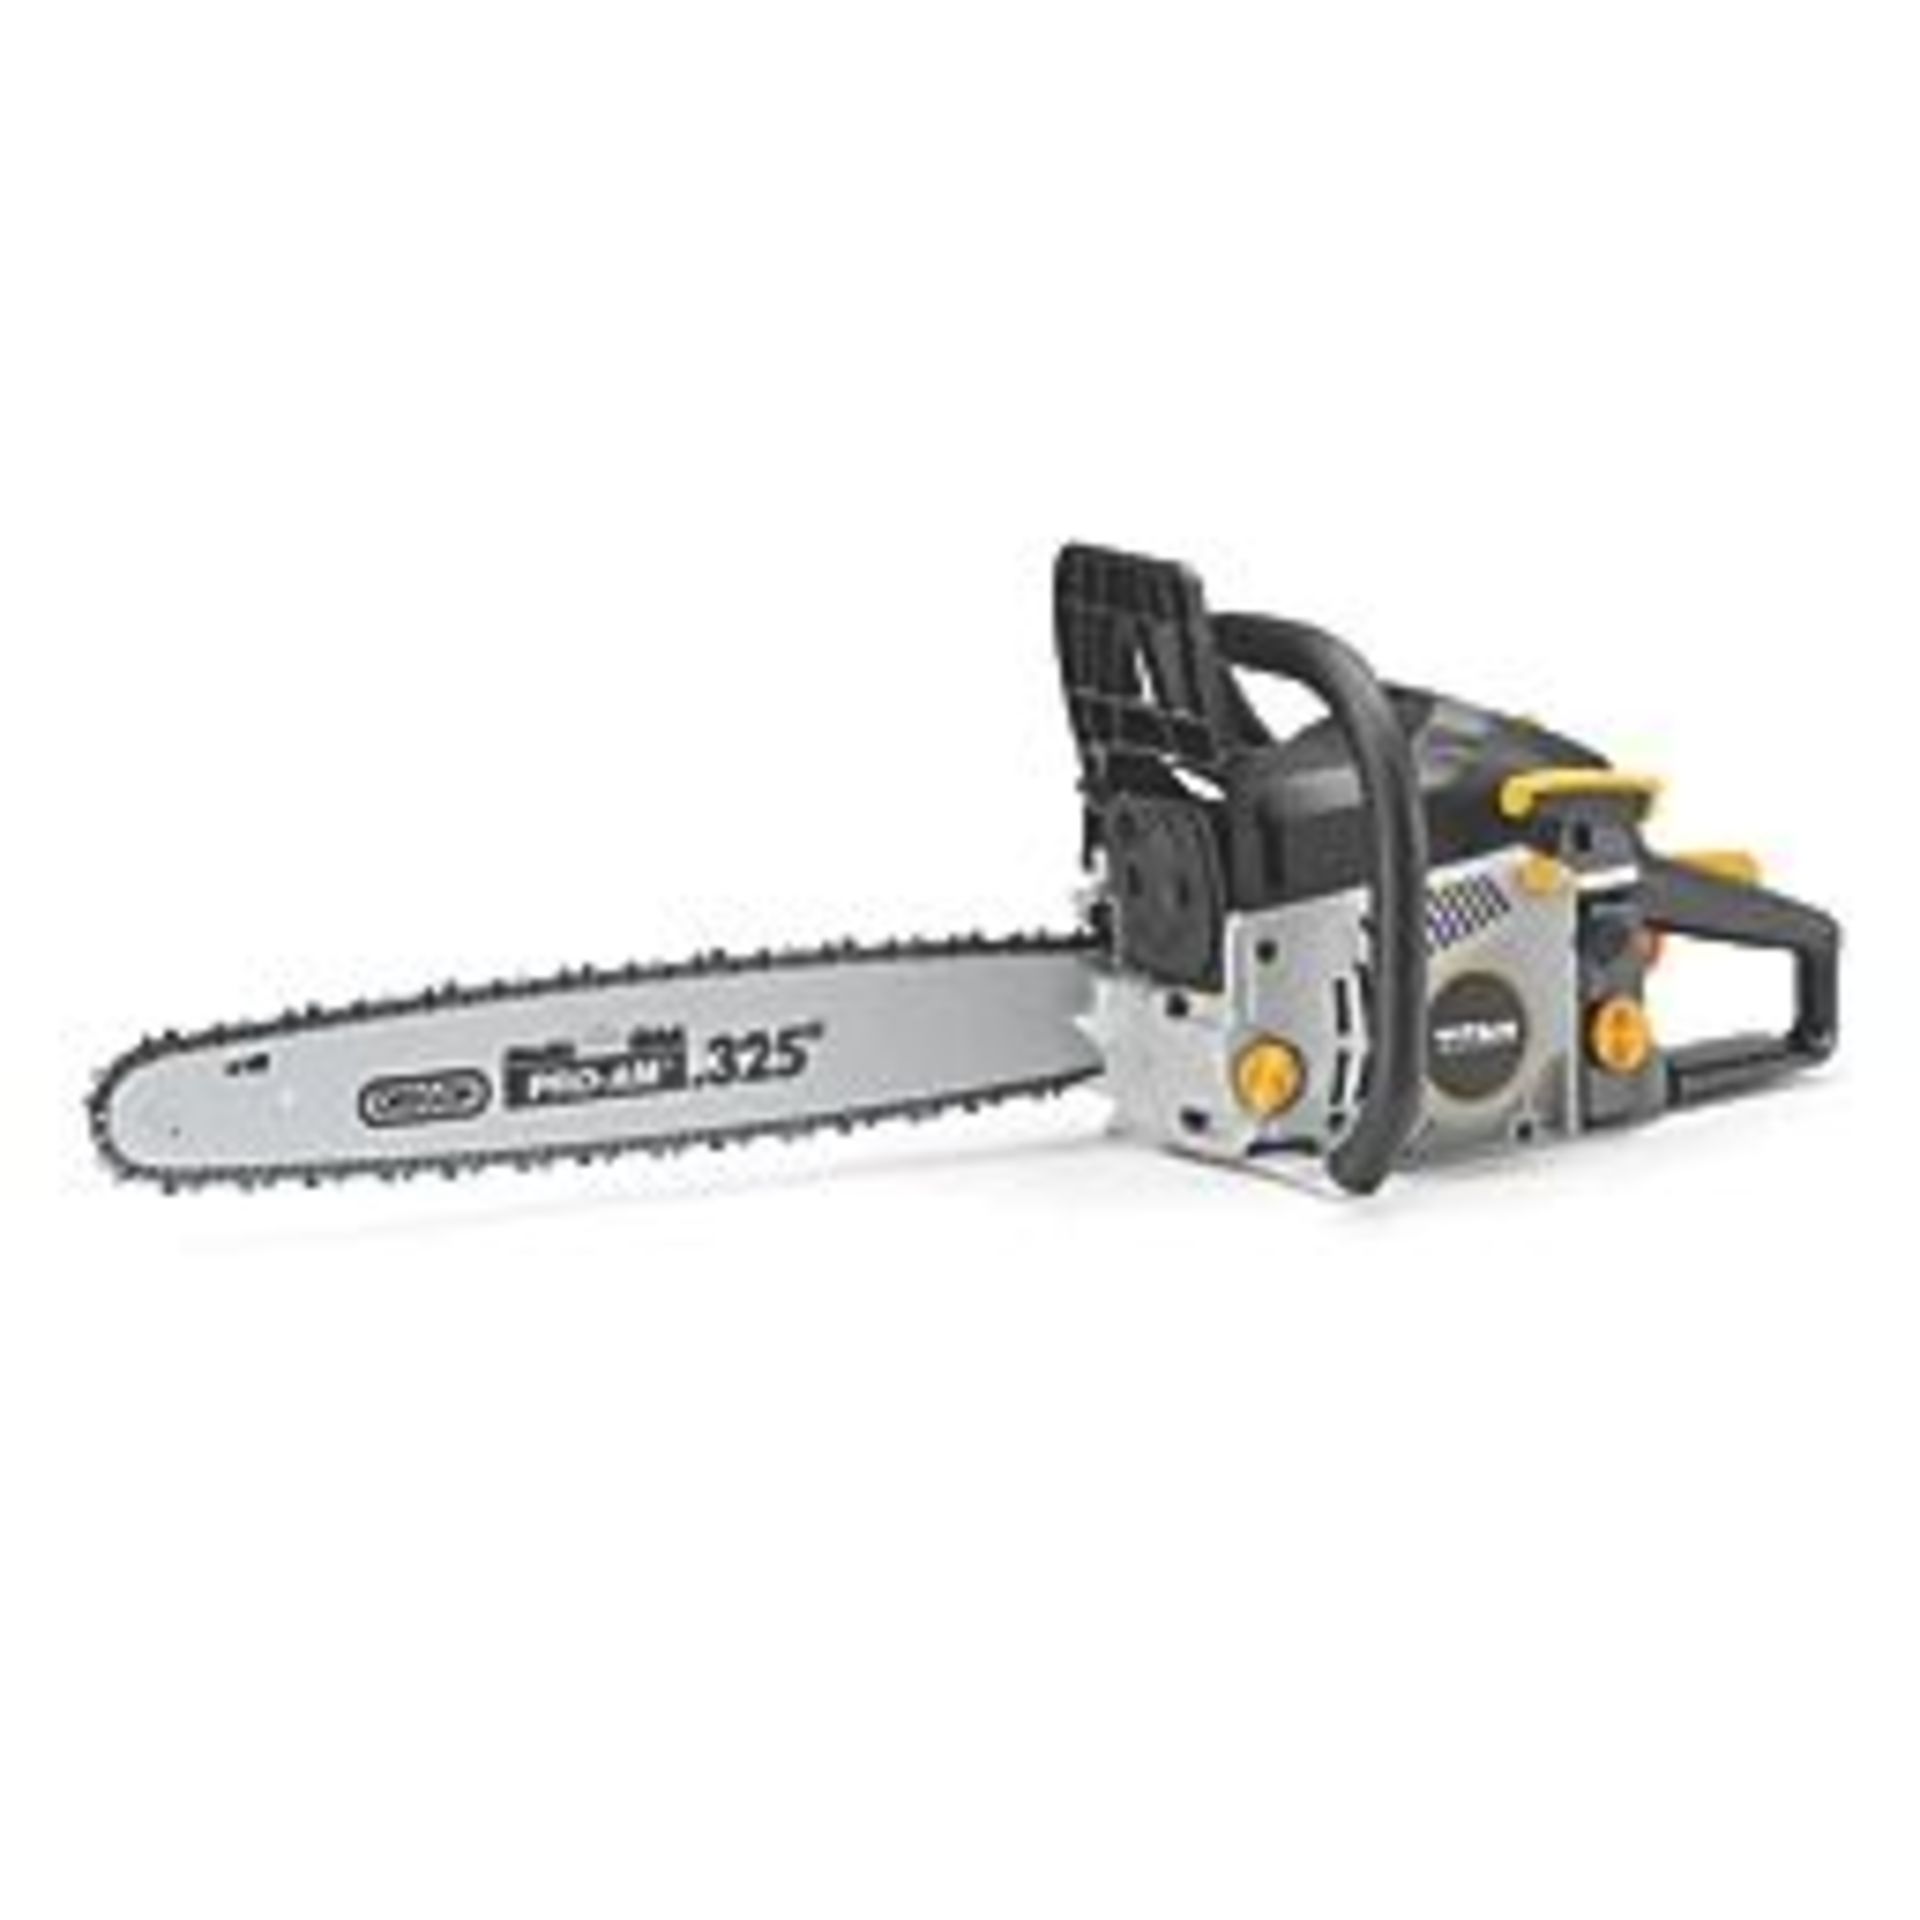 TITAN TTCSP49 50CM 49.3CC CHAINSAW. - S2.3 Powerful chainsaw with Easy-Start technology, reducing